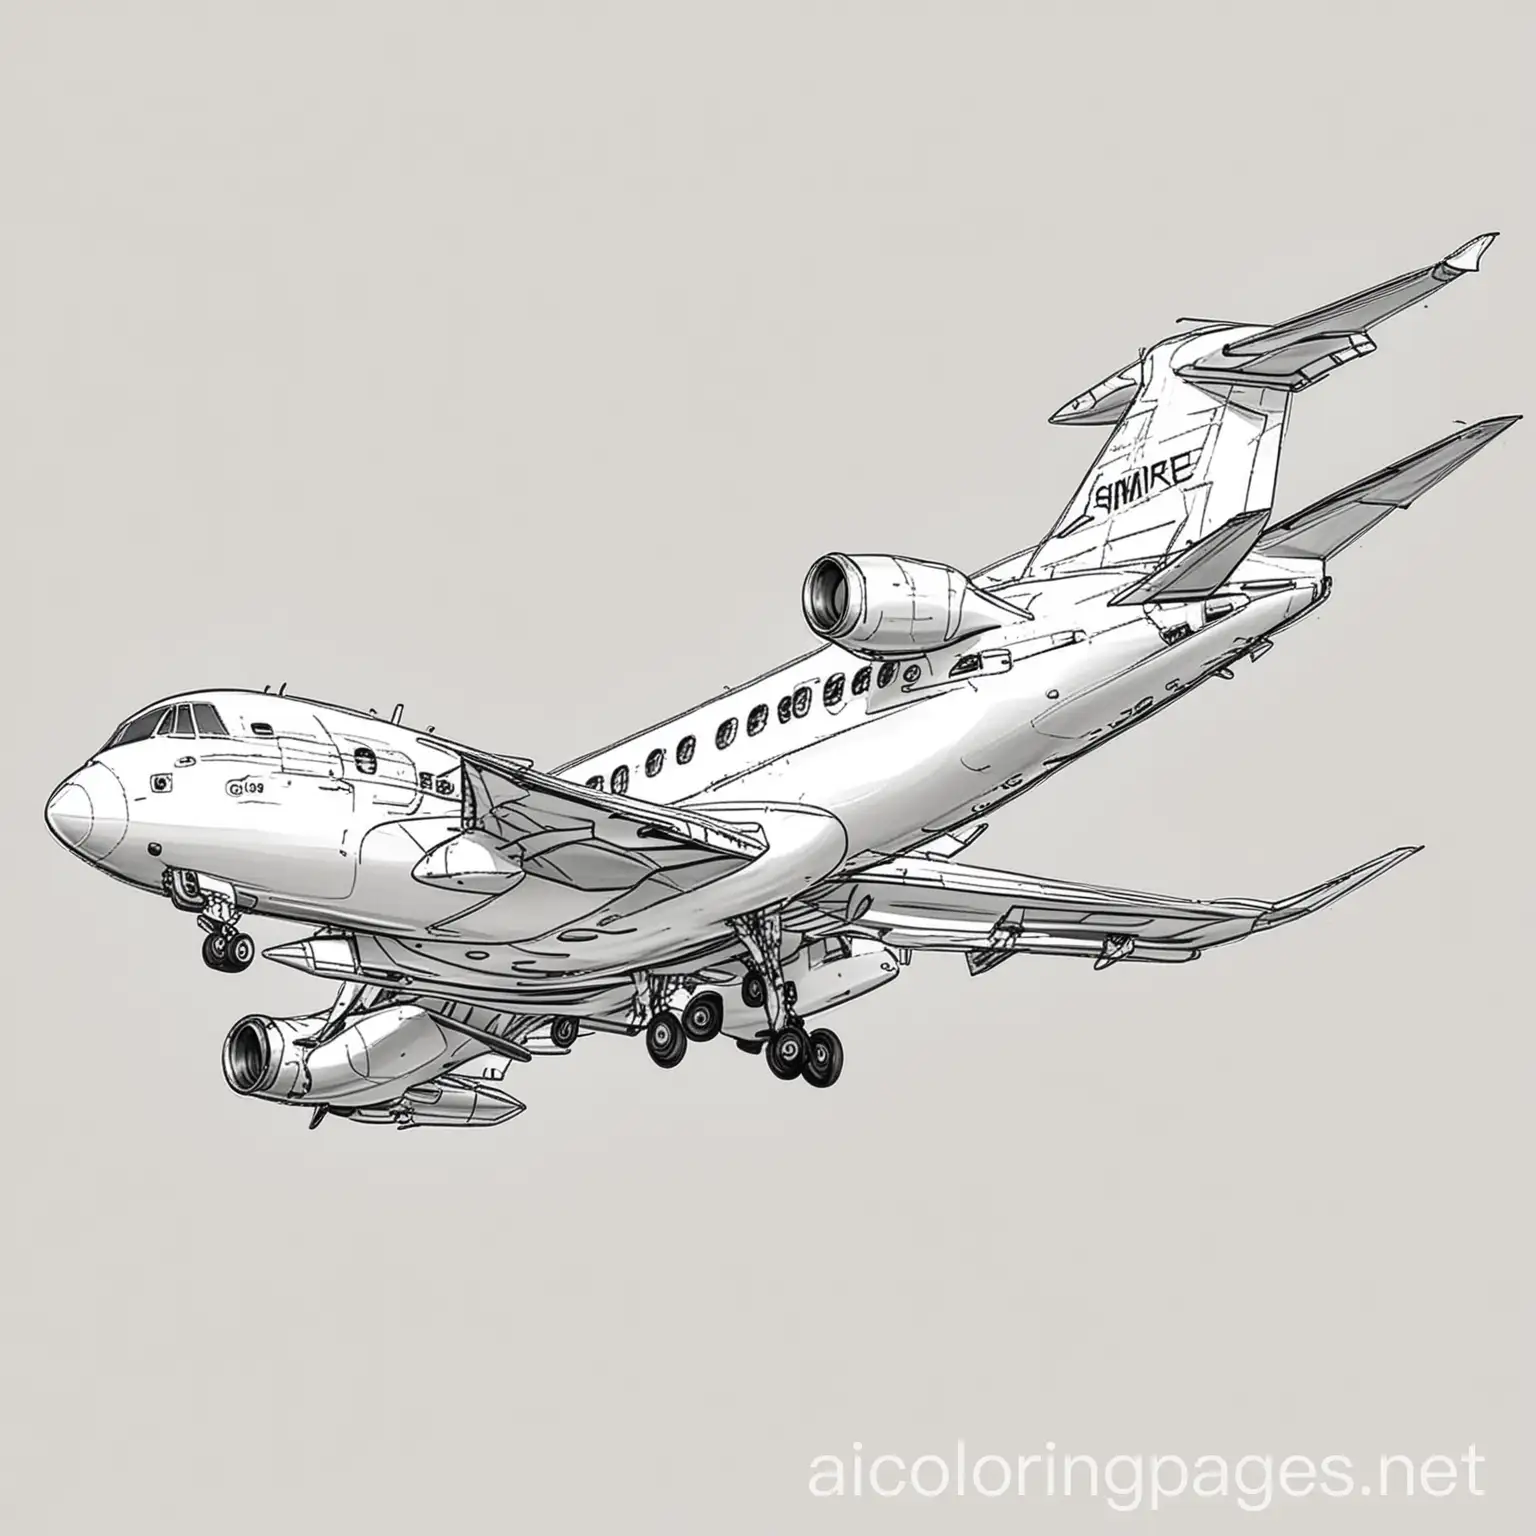 airplain, Coloring Page, black and white, line art, white background, Simplicity, Ample White Space. The background of the coloring page is plain white to make it easy for young children to color within the lines. The outlines of all the subjects are easy to distinguish, making it simple for kids to color without too much difficulty